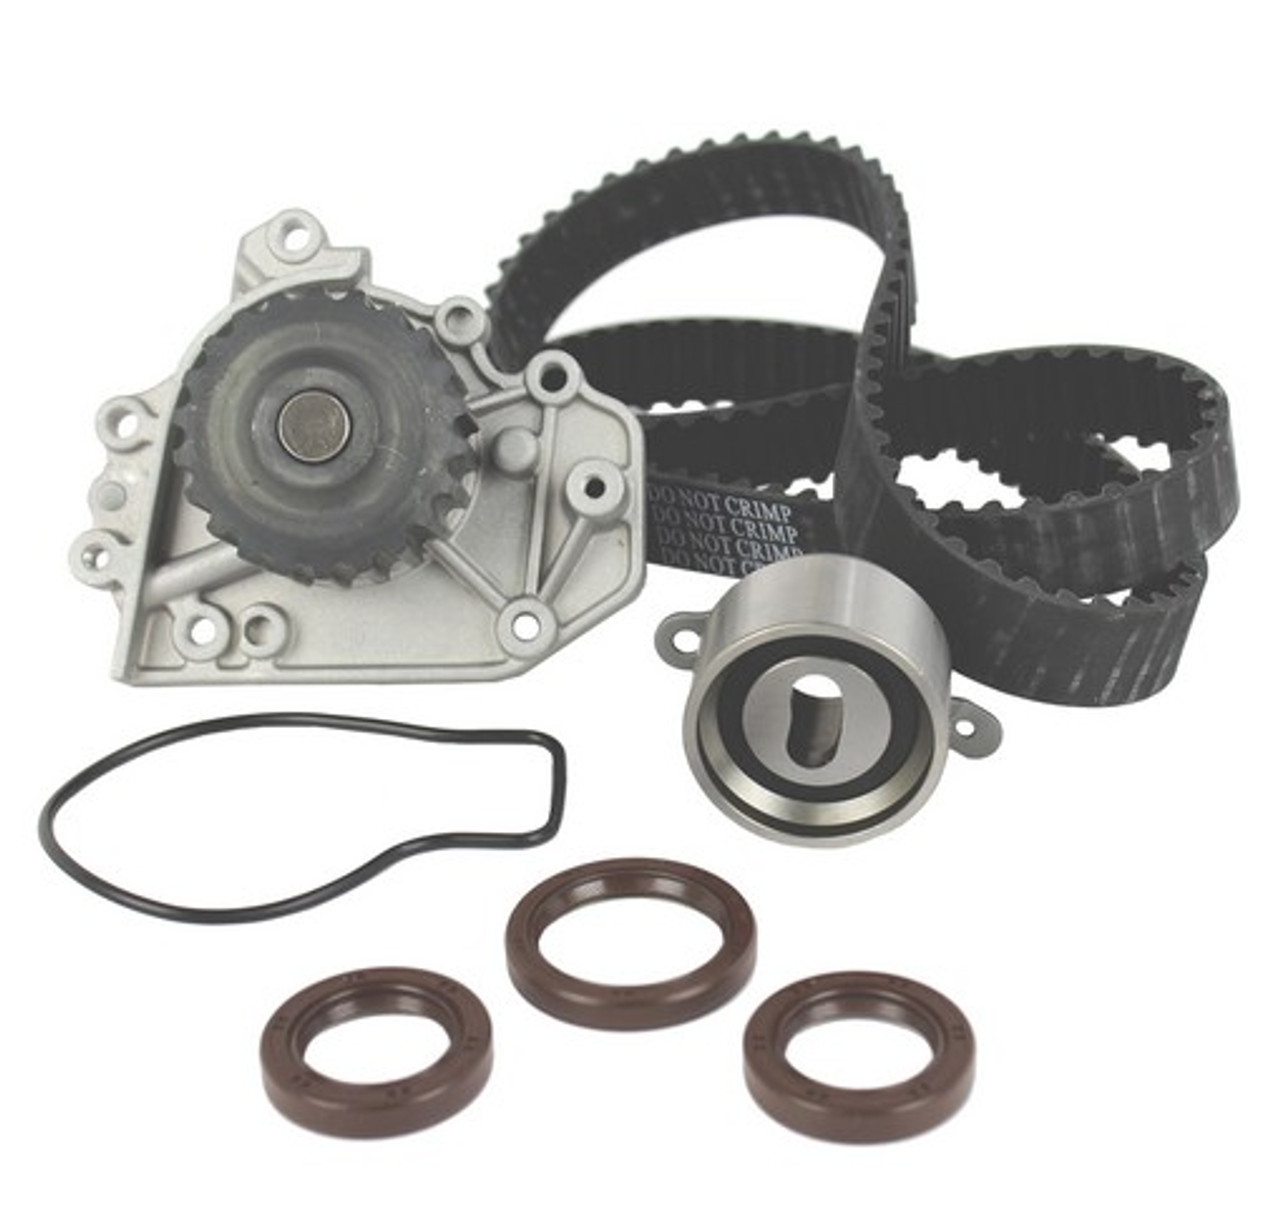 Timing Belt Kit with Water Pump 1.7L 1992 Acura Integra - TBK217WP.1